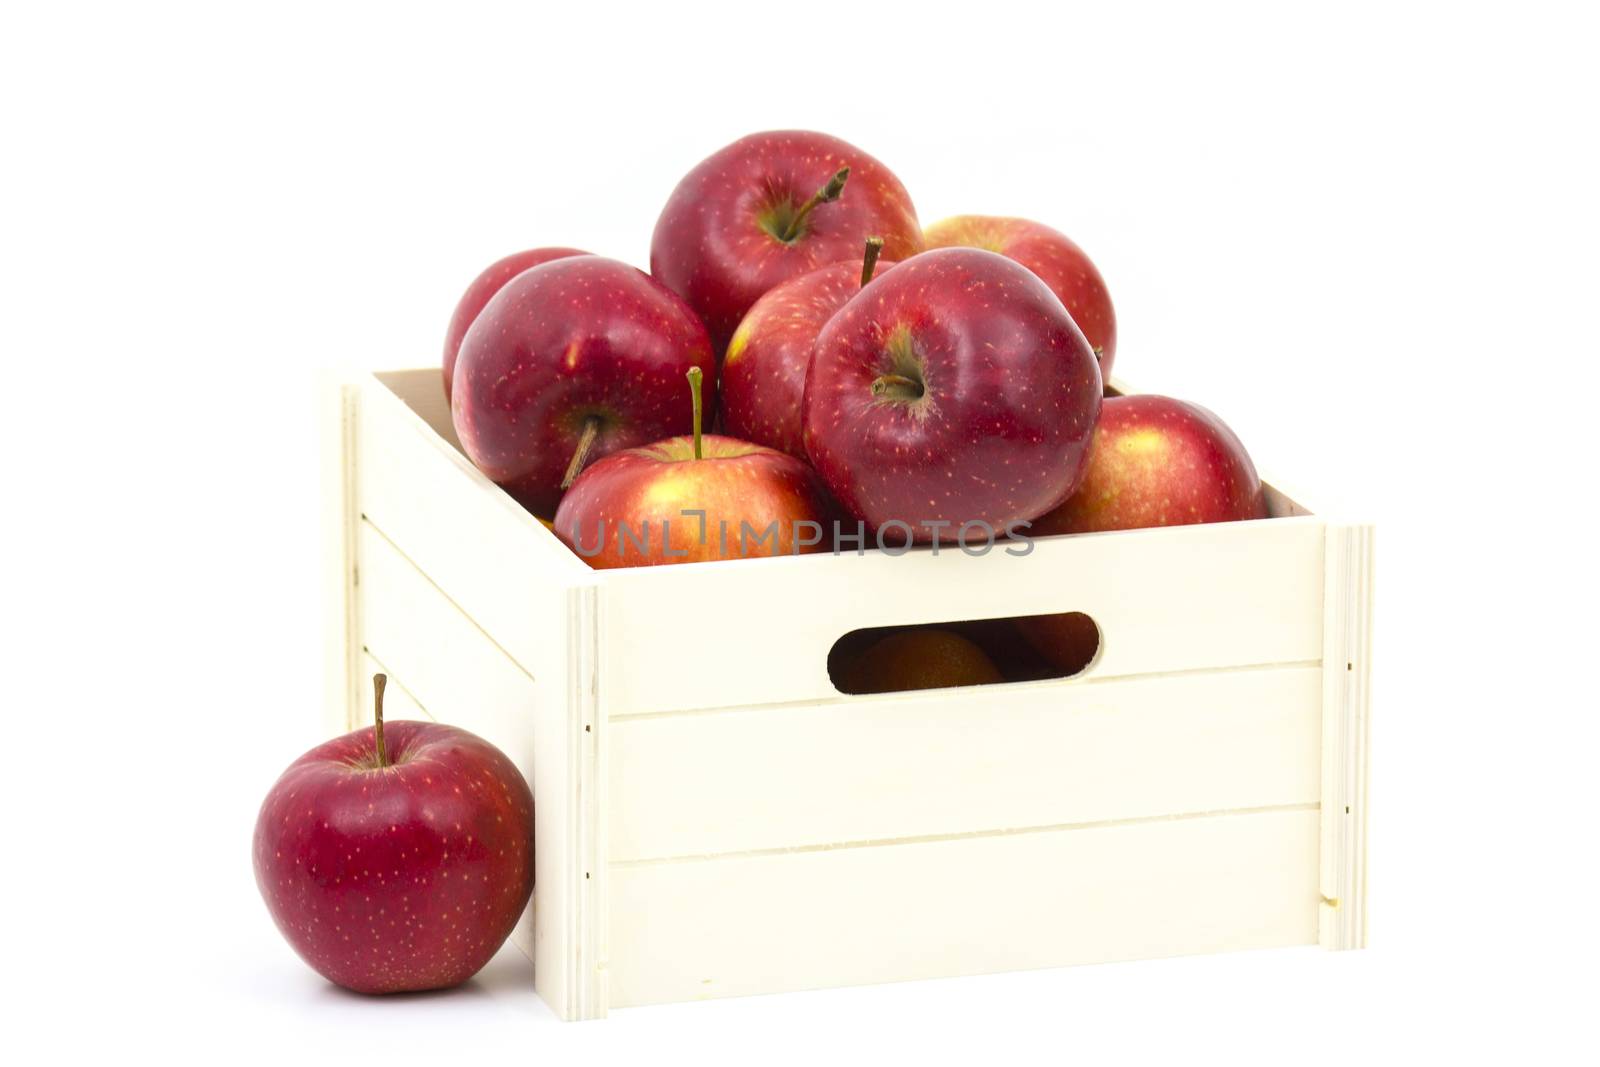  Wooden crate box full of fresh apples isolated on a white background
